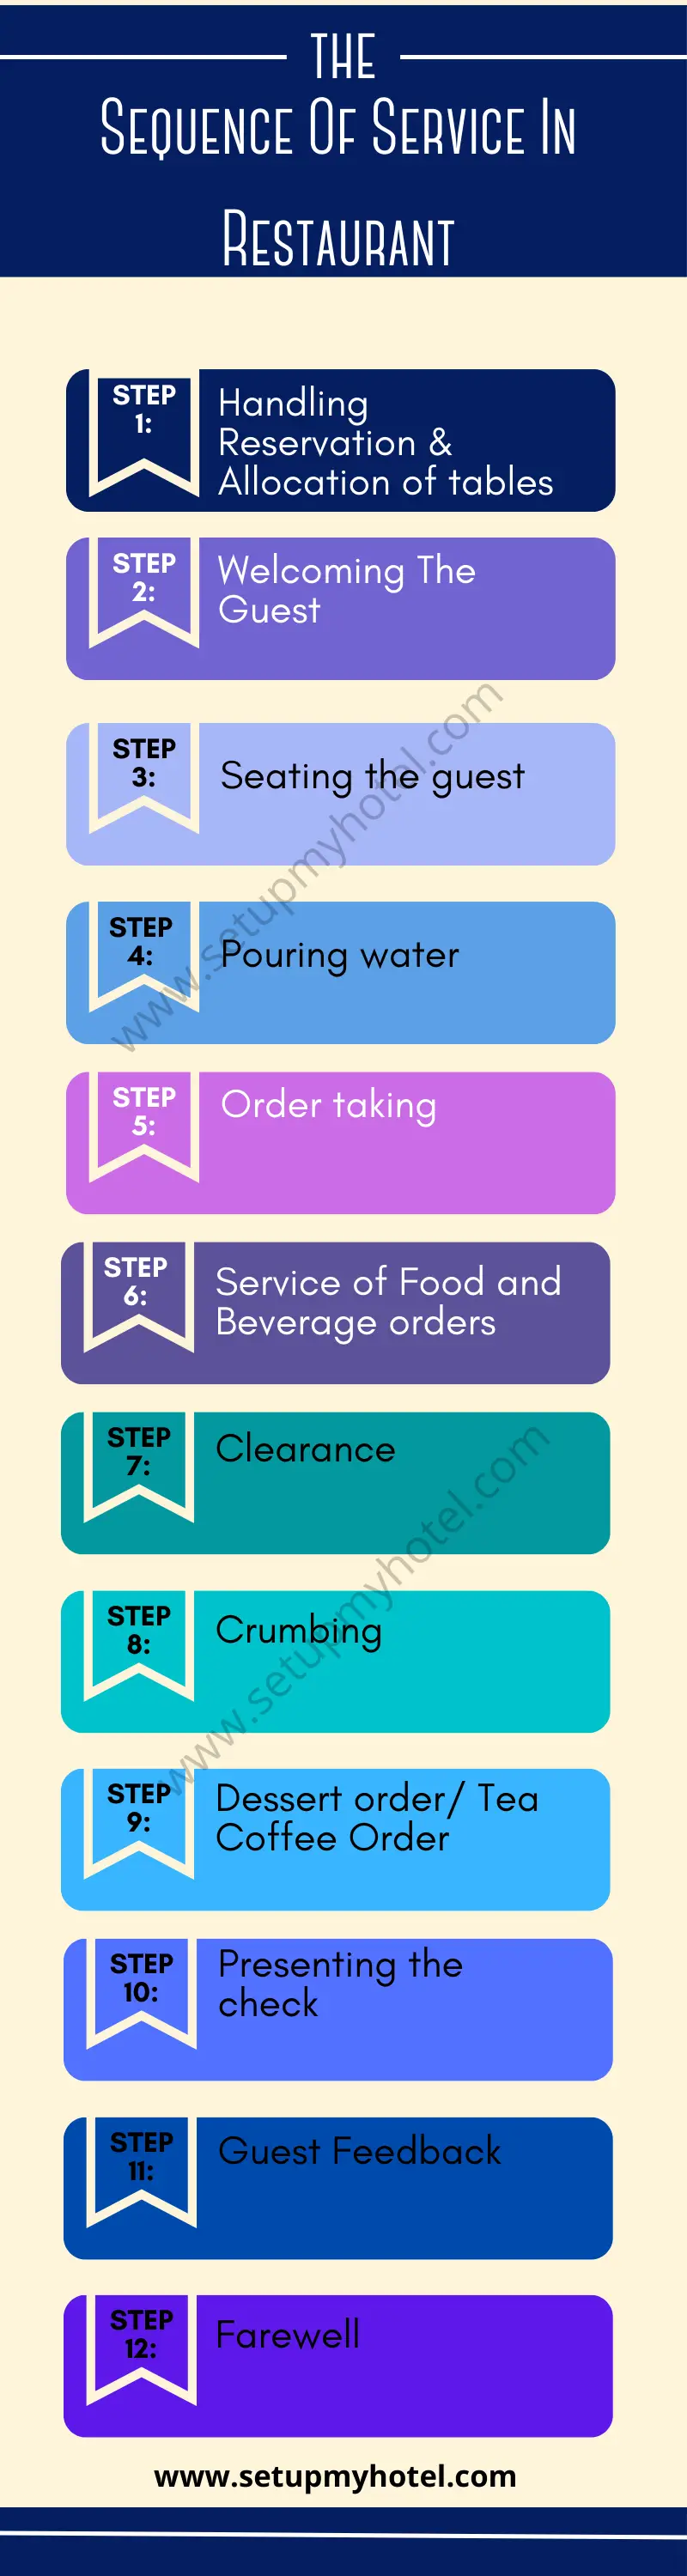 The sequence of service in a restaurant is a crucial aspect of providing a great dining experience for guests. It involves a step-by-step process that ensures that guests receive their meals in a timely and efficient manner. The first step in the sequence of service is greeting the guests and seating them at their table. This is a good opportunity for the server to introduce themselves and make the guests feel welcome. The server should also take the time to explain any specials or promotions that the restaurant is currently offering. Once the guests are seated, the server should take their drink orders and provide them with menus. It is important that the server is knowledgeable about the menu and can answer any questions the guests may have. After the guests have ordered their meals, the server should ensure that their drinks are topped up and inform the kitchen of the order. When the meals are ready, the server should deliver them promptly and check that everything is to the guests' satisfaction. Throughout the meal, the server should continue to check on the guests and ensure that they have everything they need. Once the meal is finished, the server should clear the table and offer dessert or coffee. Finally, the server should present the bill and process the payment in a timely and efficient manner. By following this sequence of service, the restaurant can provide an enjoyable and memorable dining experience for its guests.